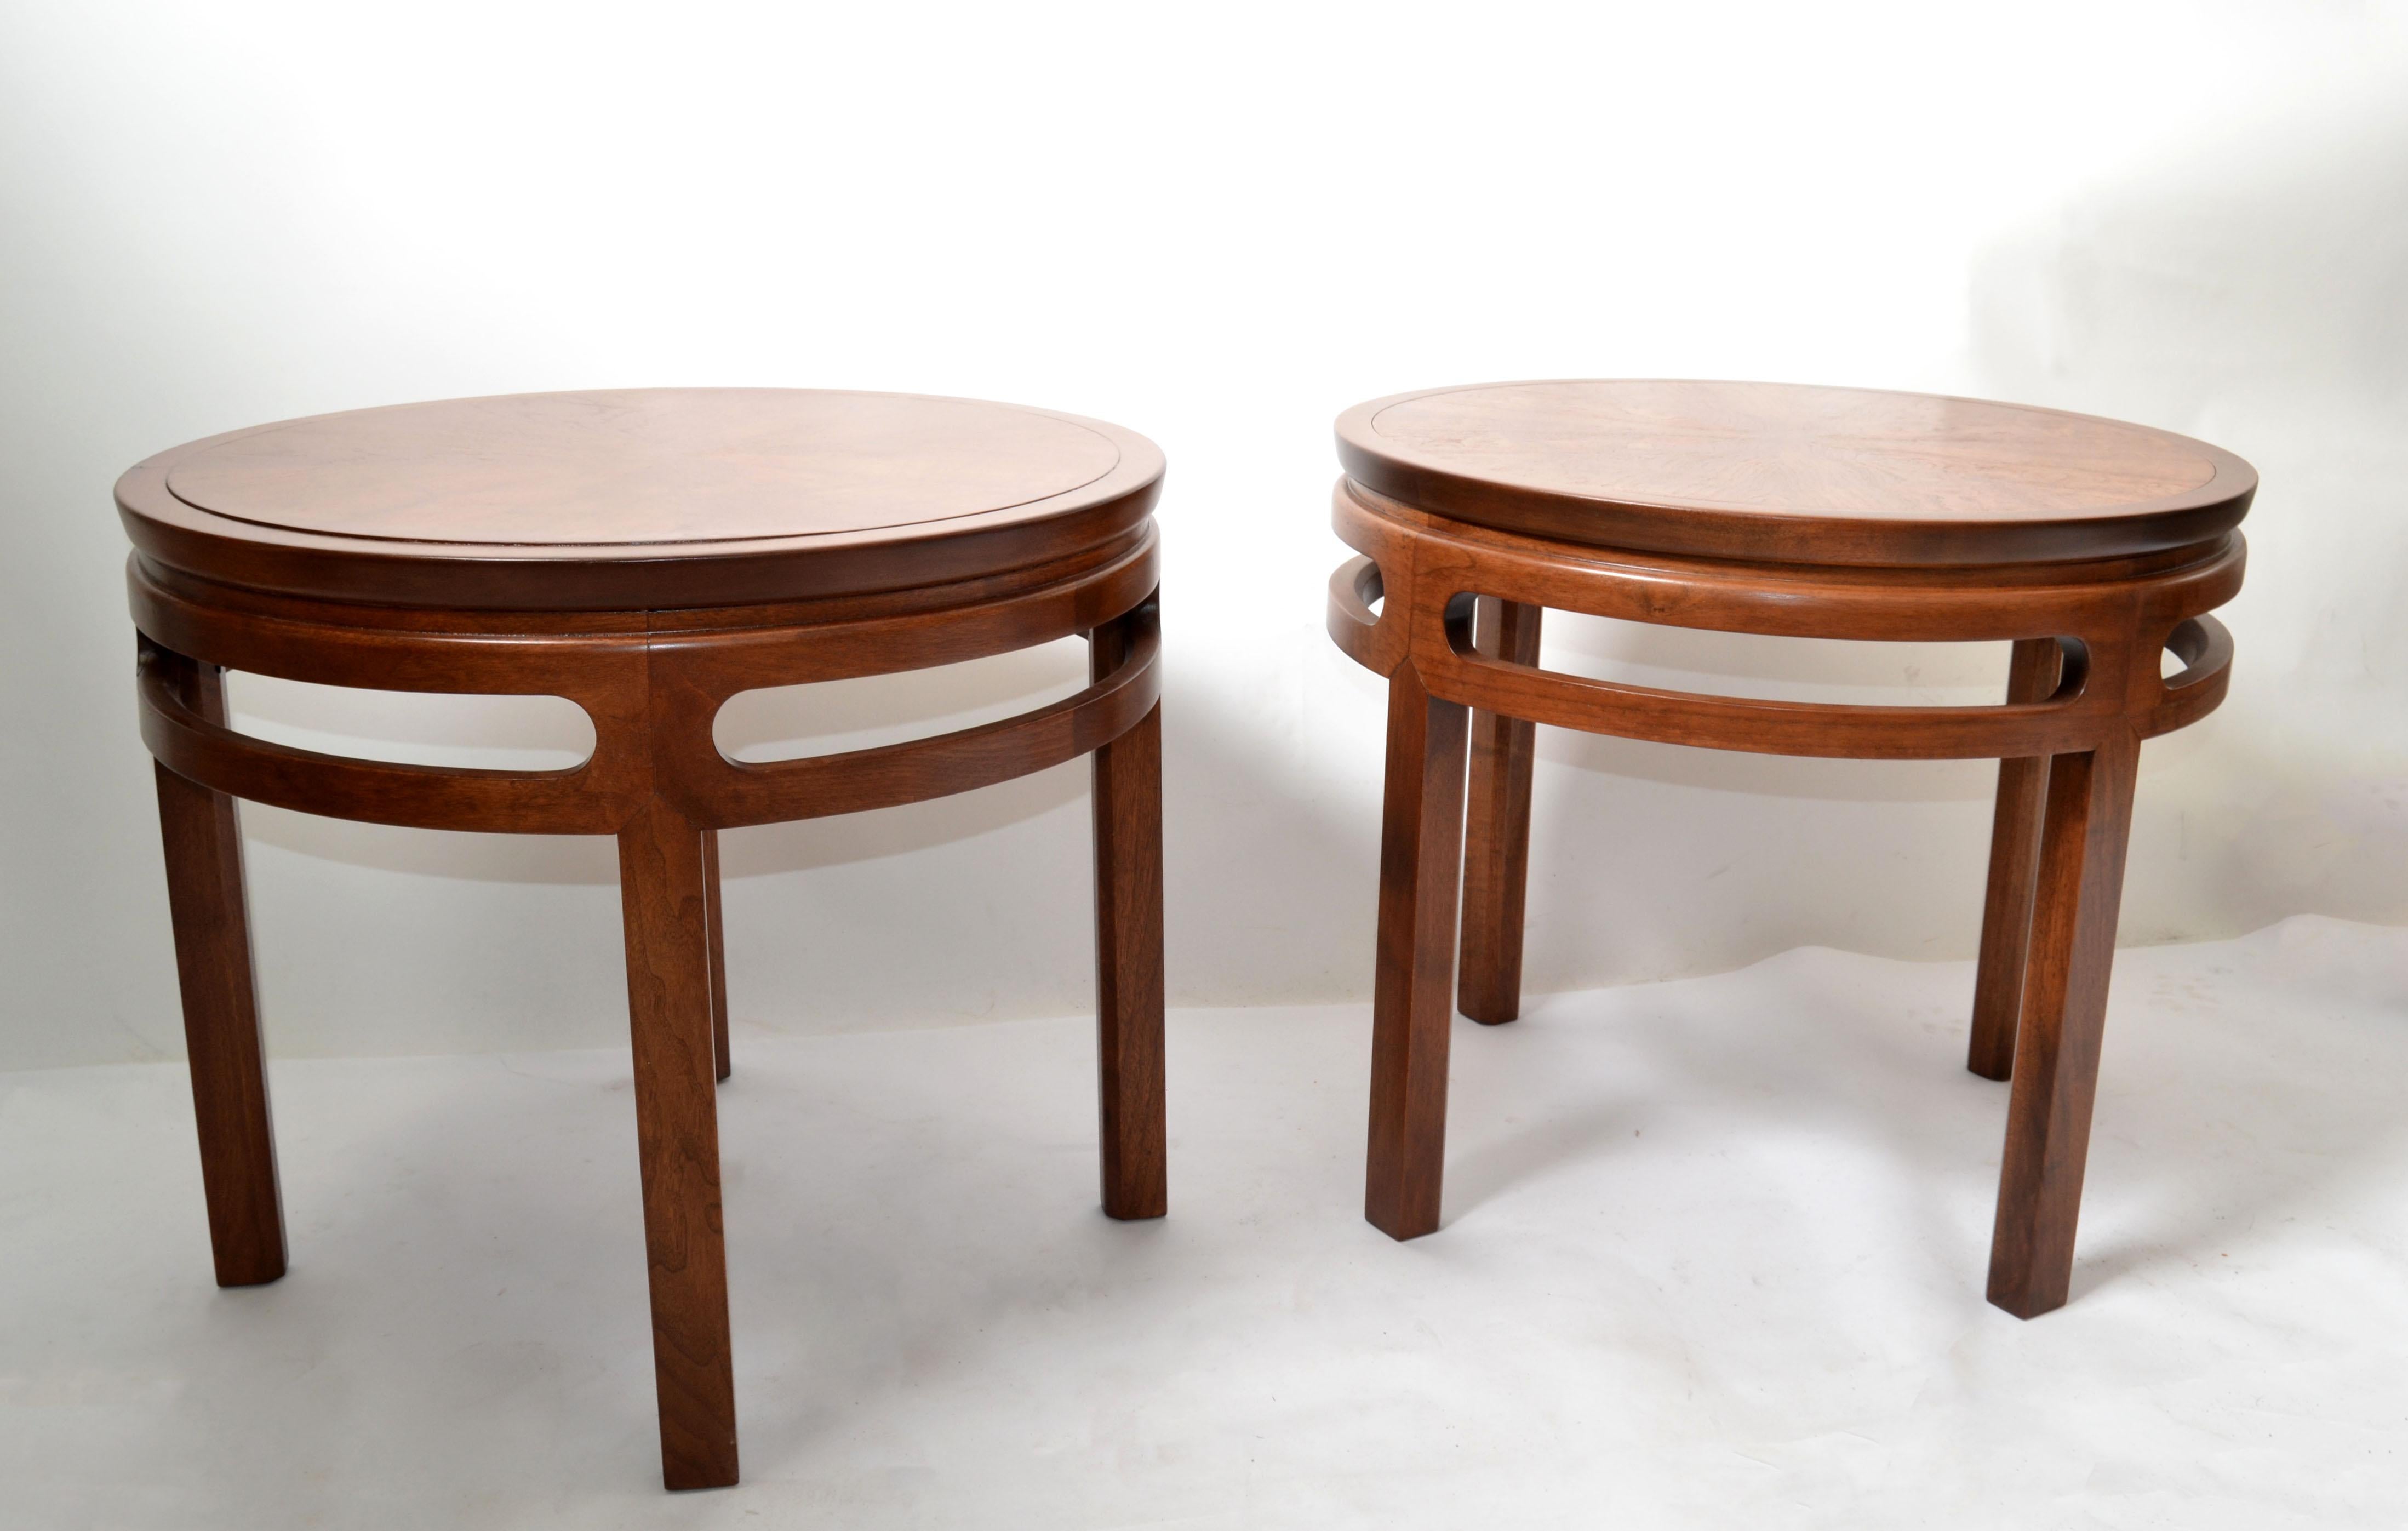 Chinese Export Asian Modern Far East Collection Round Table Michael Taylor Baker Furniture Pair For Sale